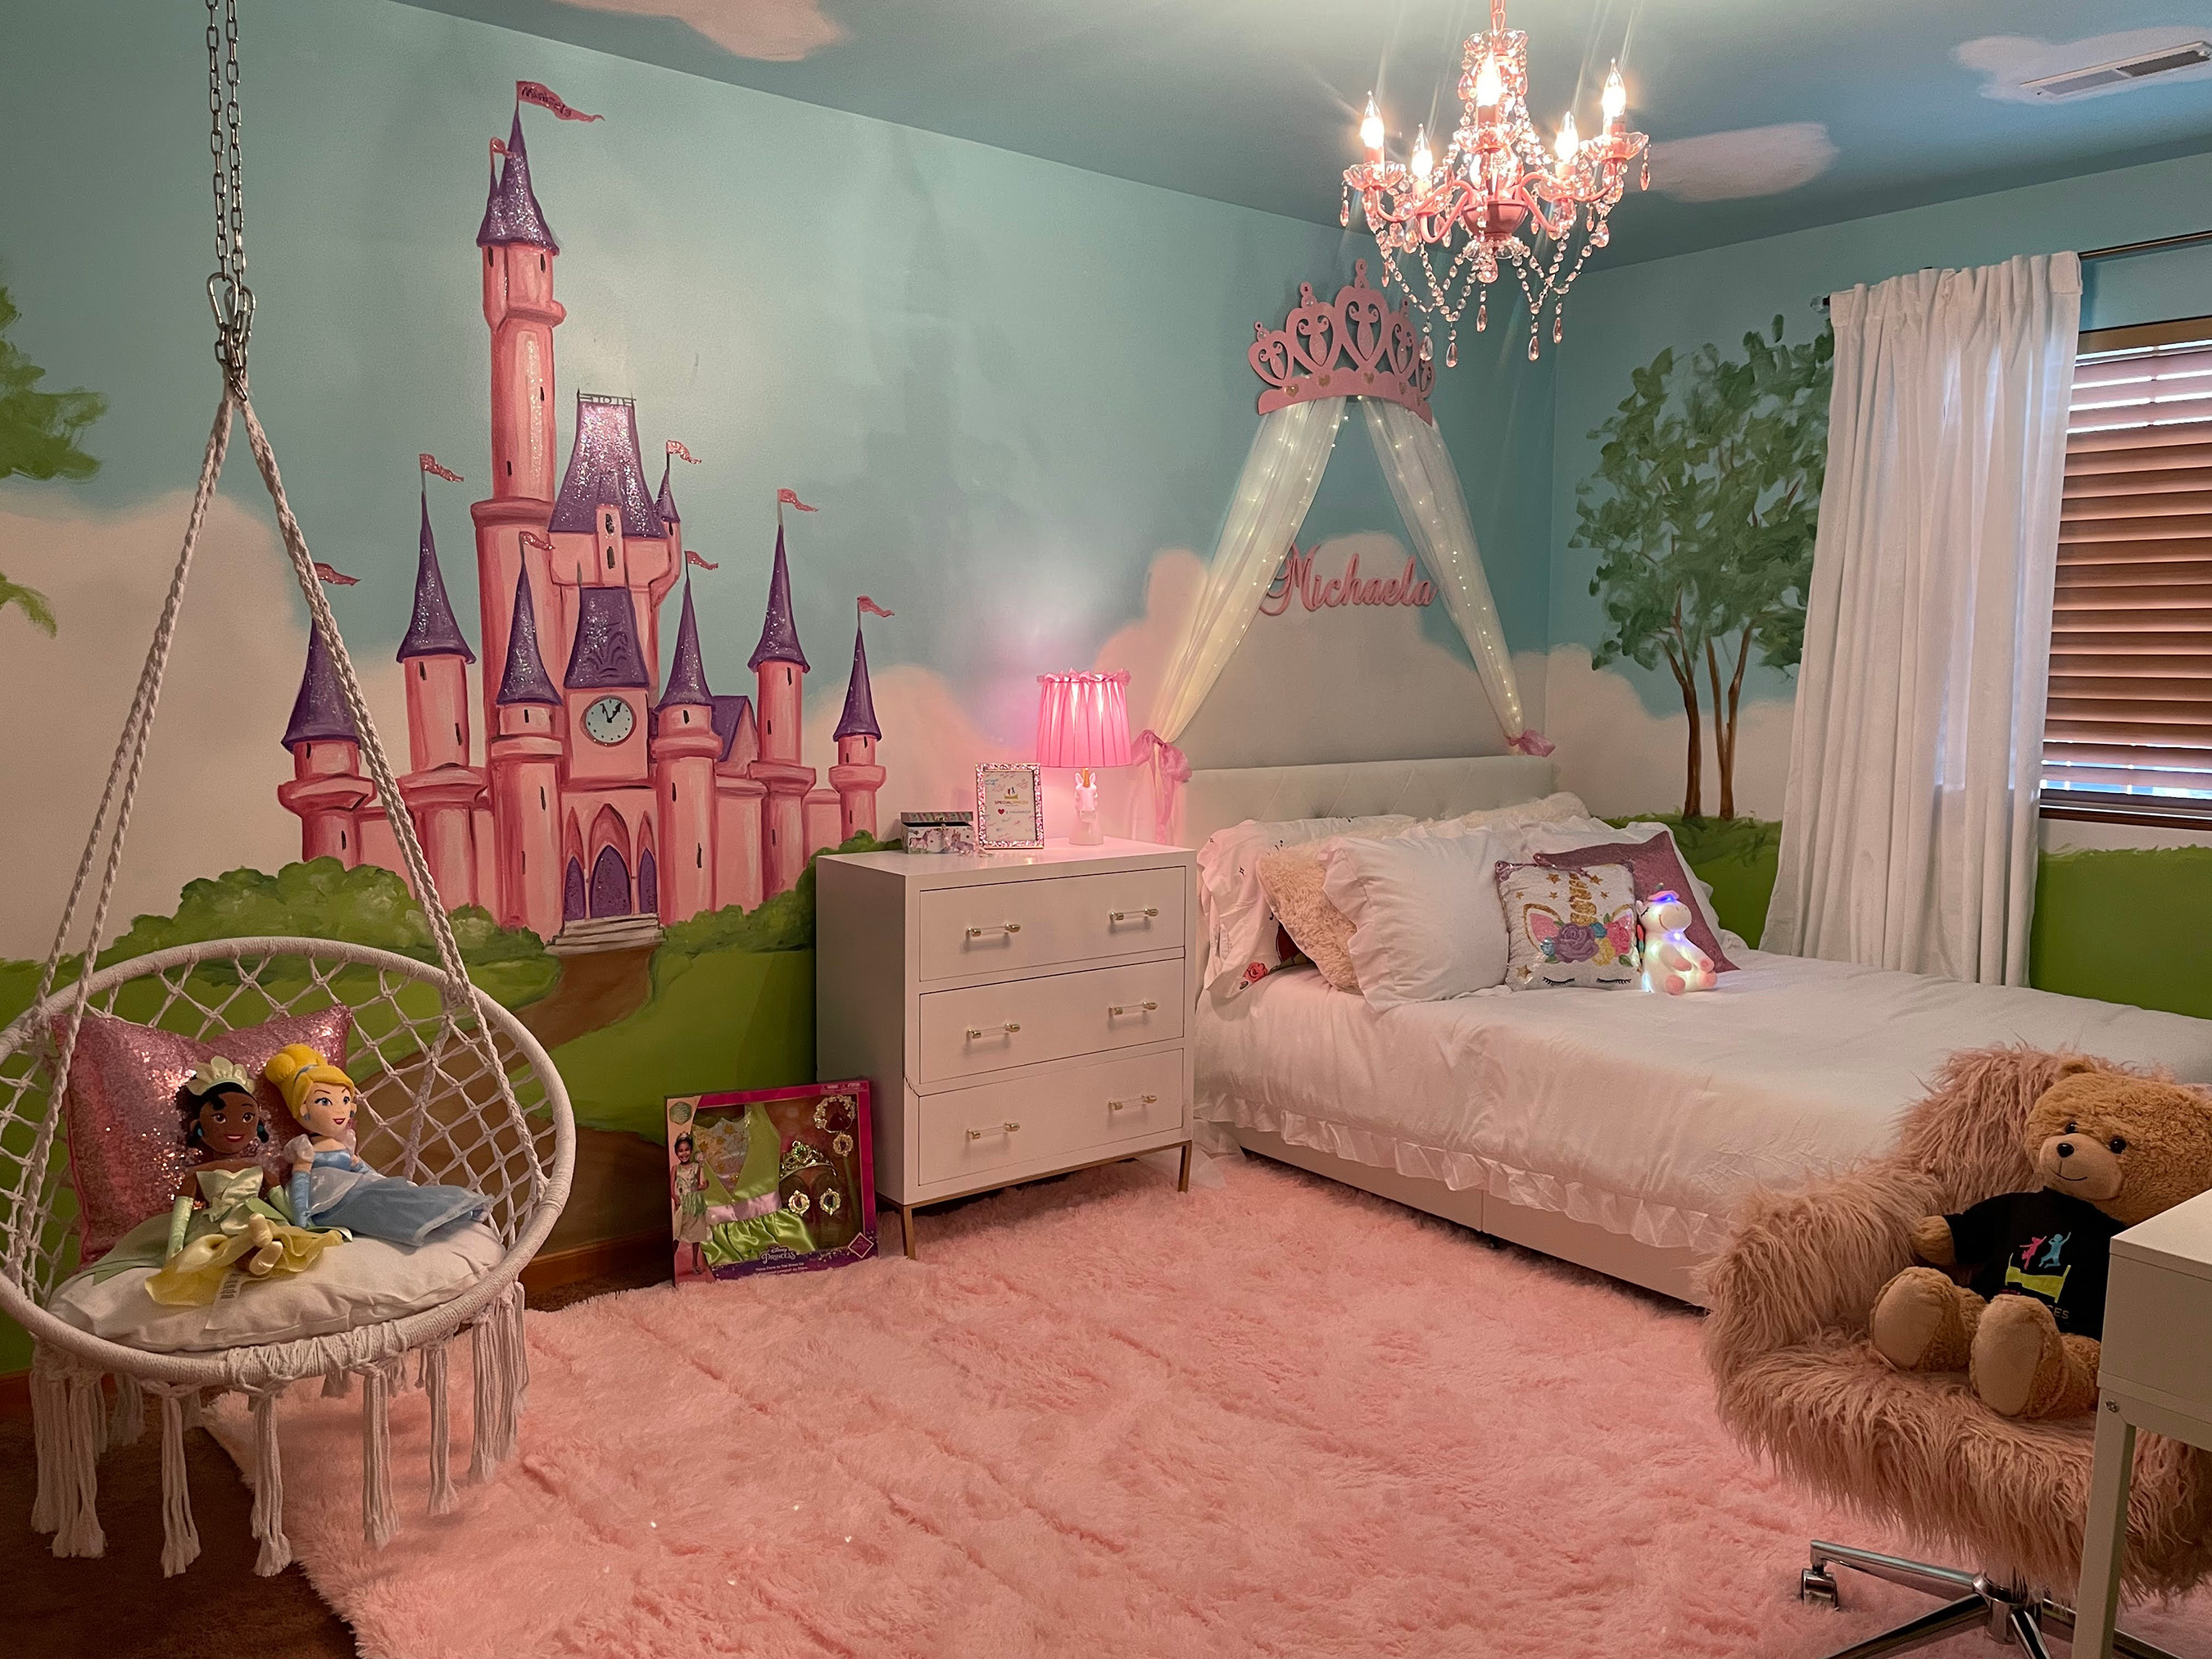 A room inspired by Michaela’s love for princesses